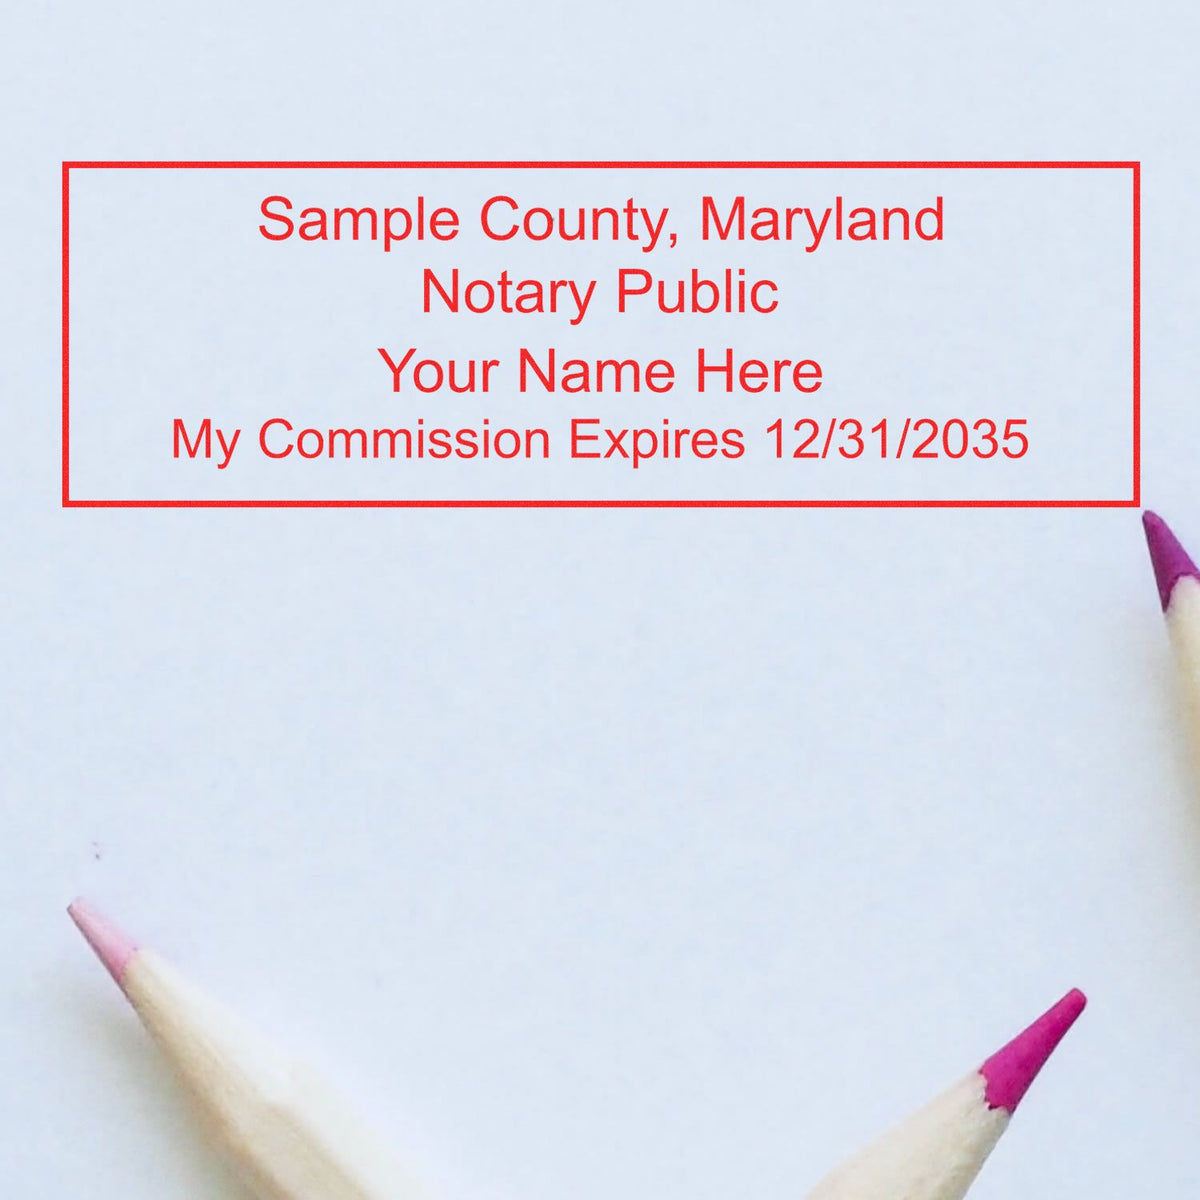 The Self-Inking Rectangular Maryland Notary Stamp stamp impression comes to life with a crisp, detailed photo on paper - showcasing true professional quality.